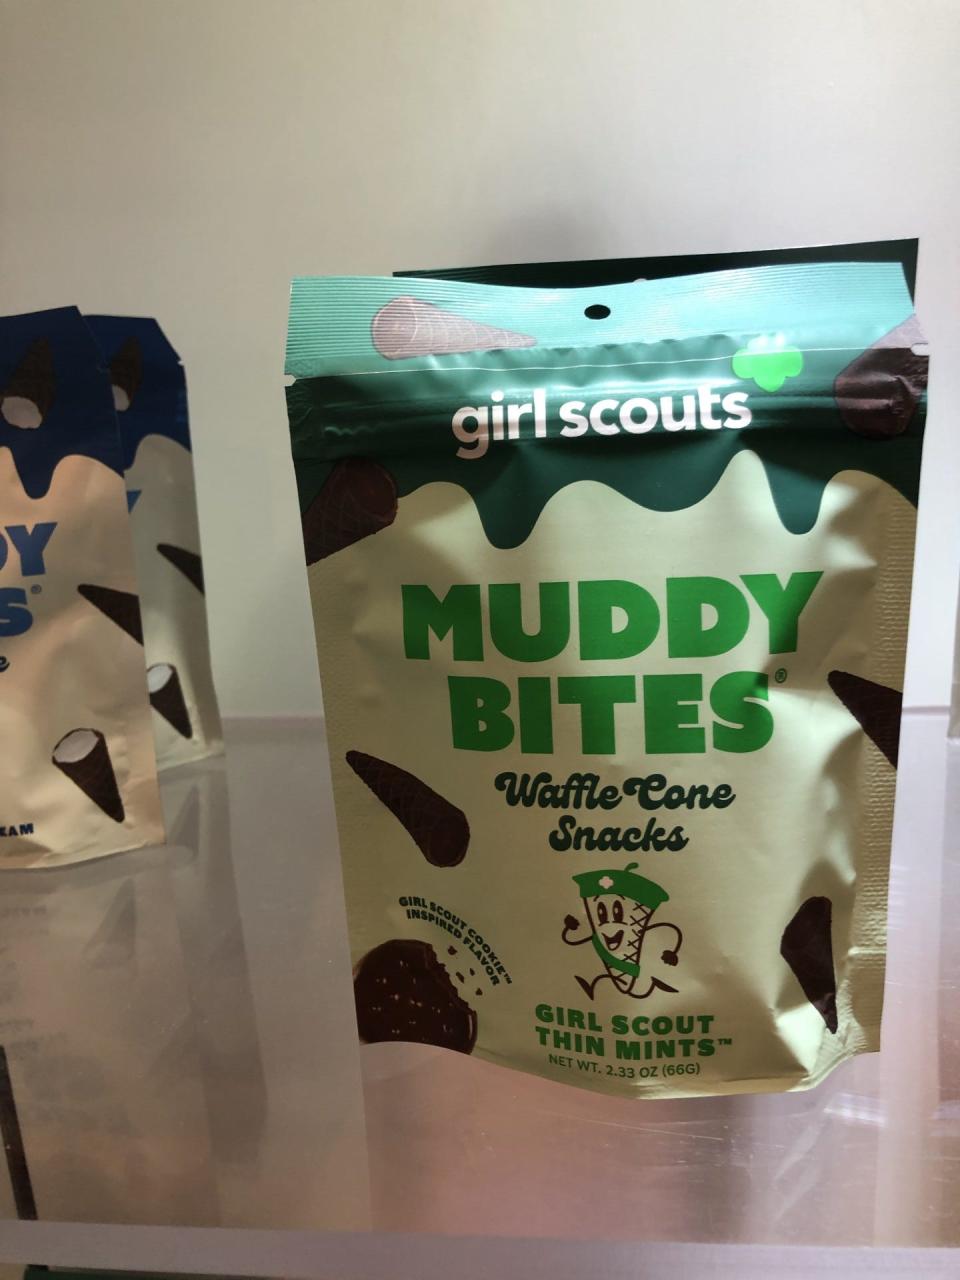 Muddy Bites Girl Scout Thin Mints waffle cone snacks.